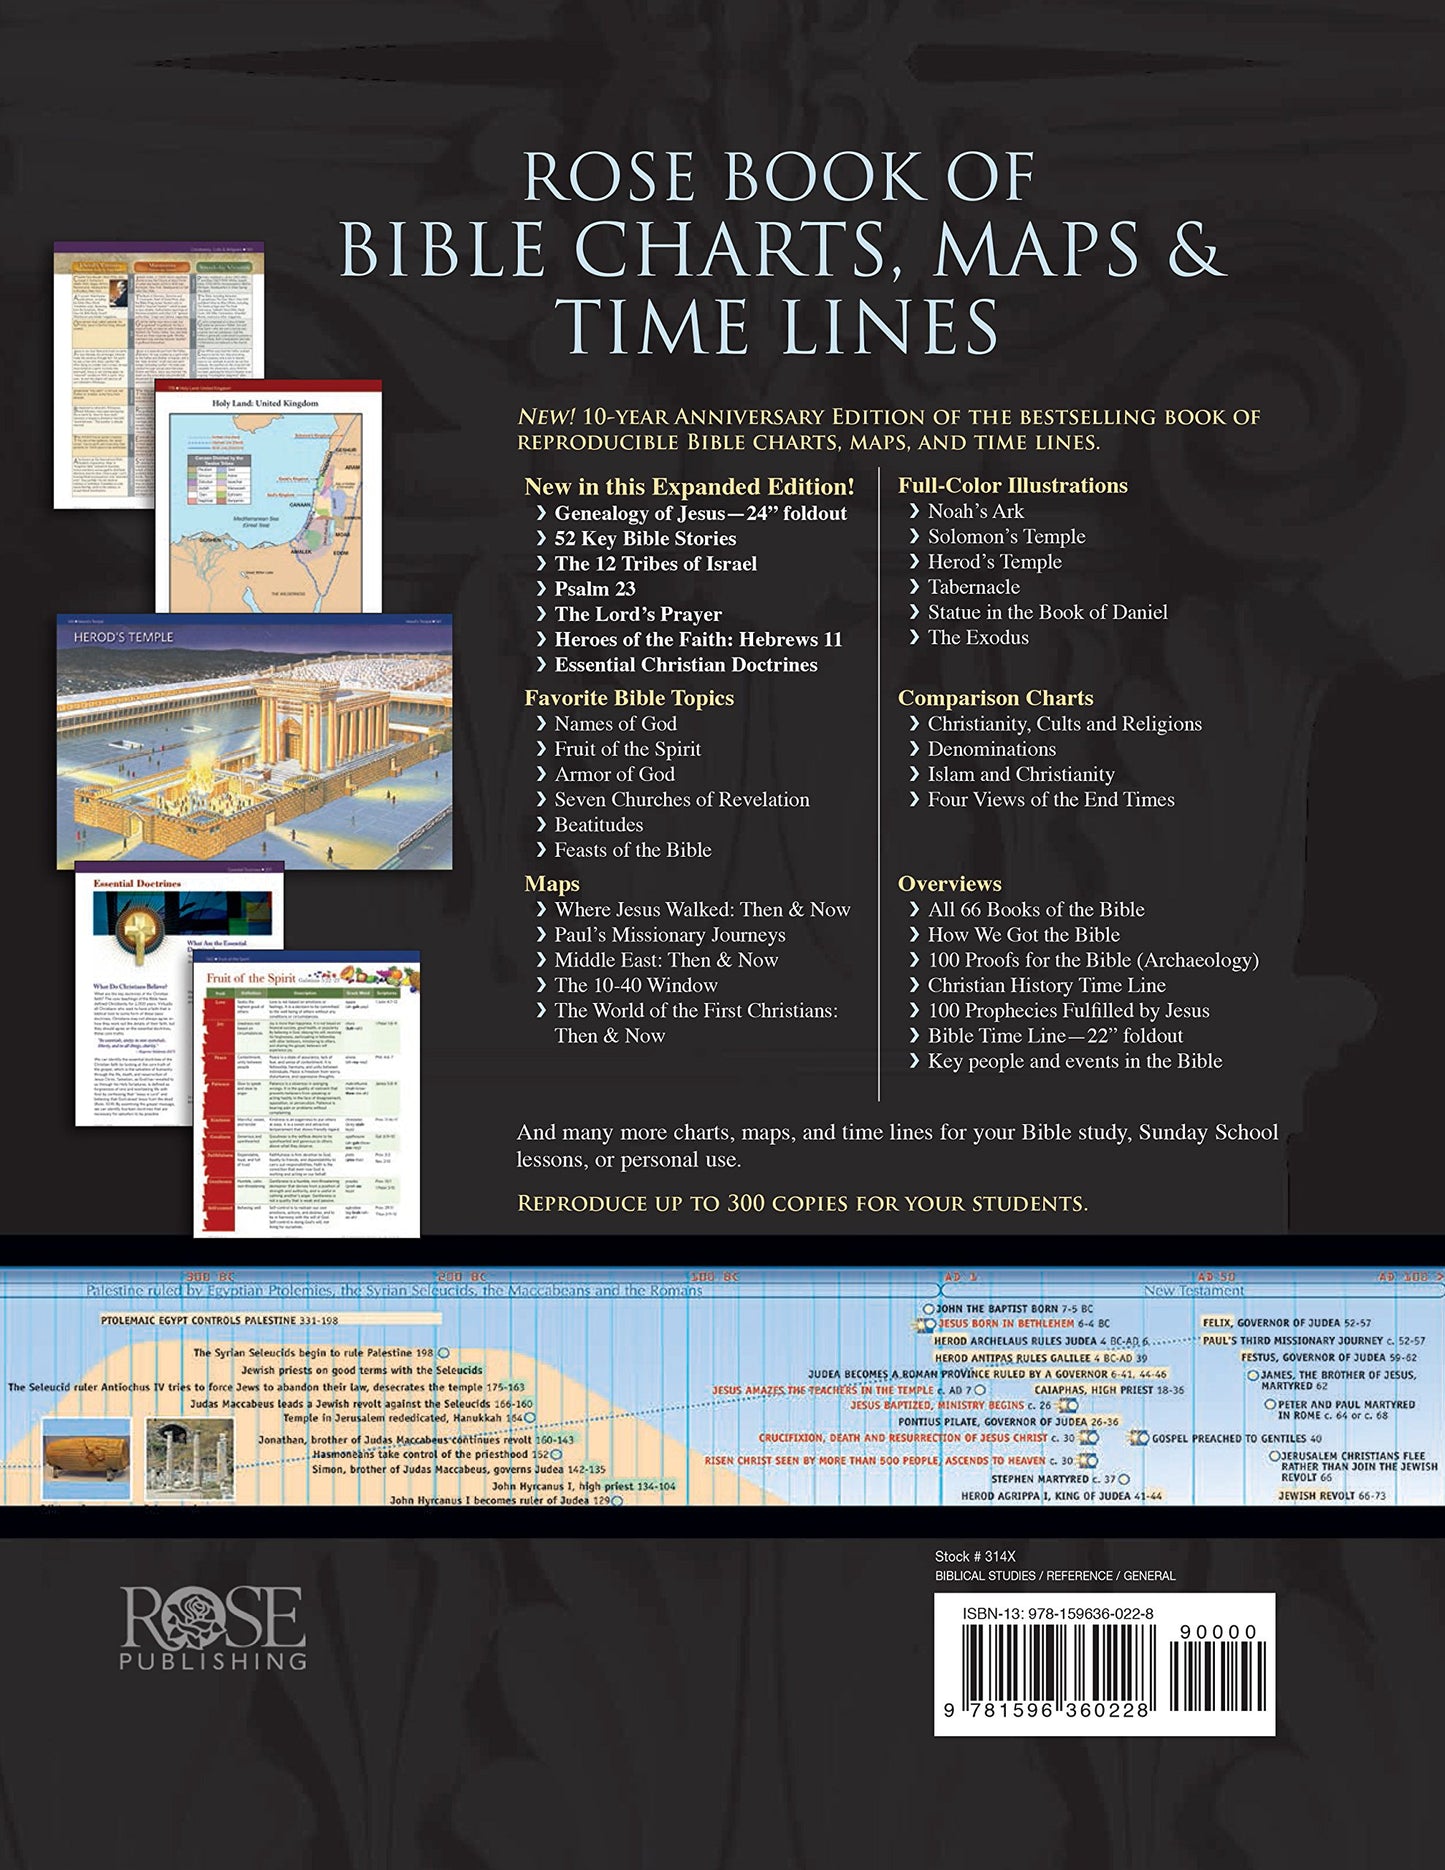 Rose Book of Bible Charts, Maps, and Time Lines